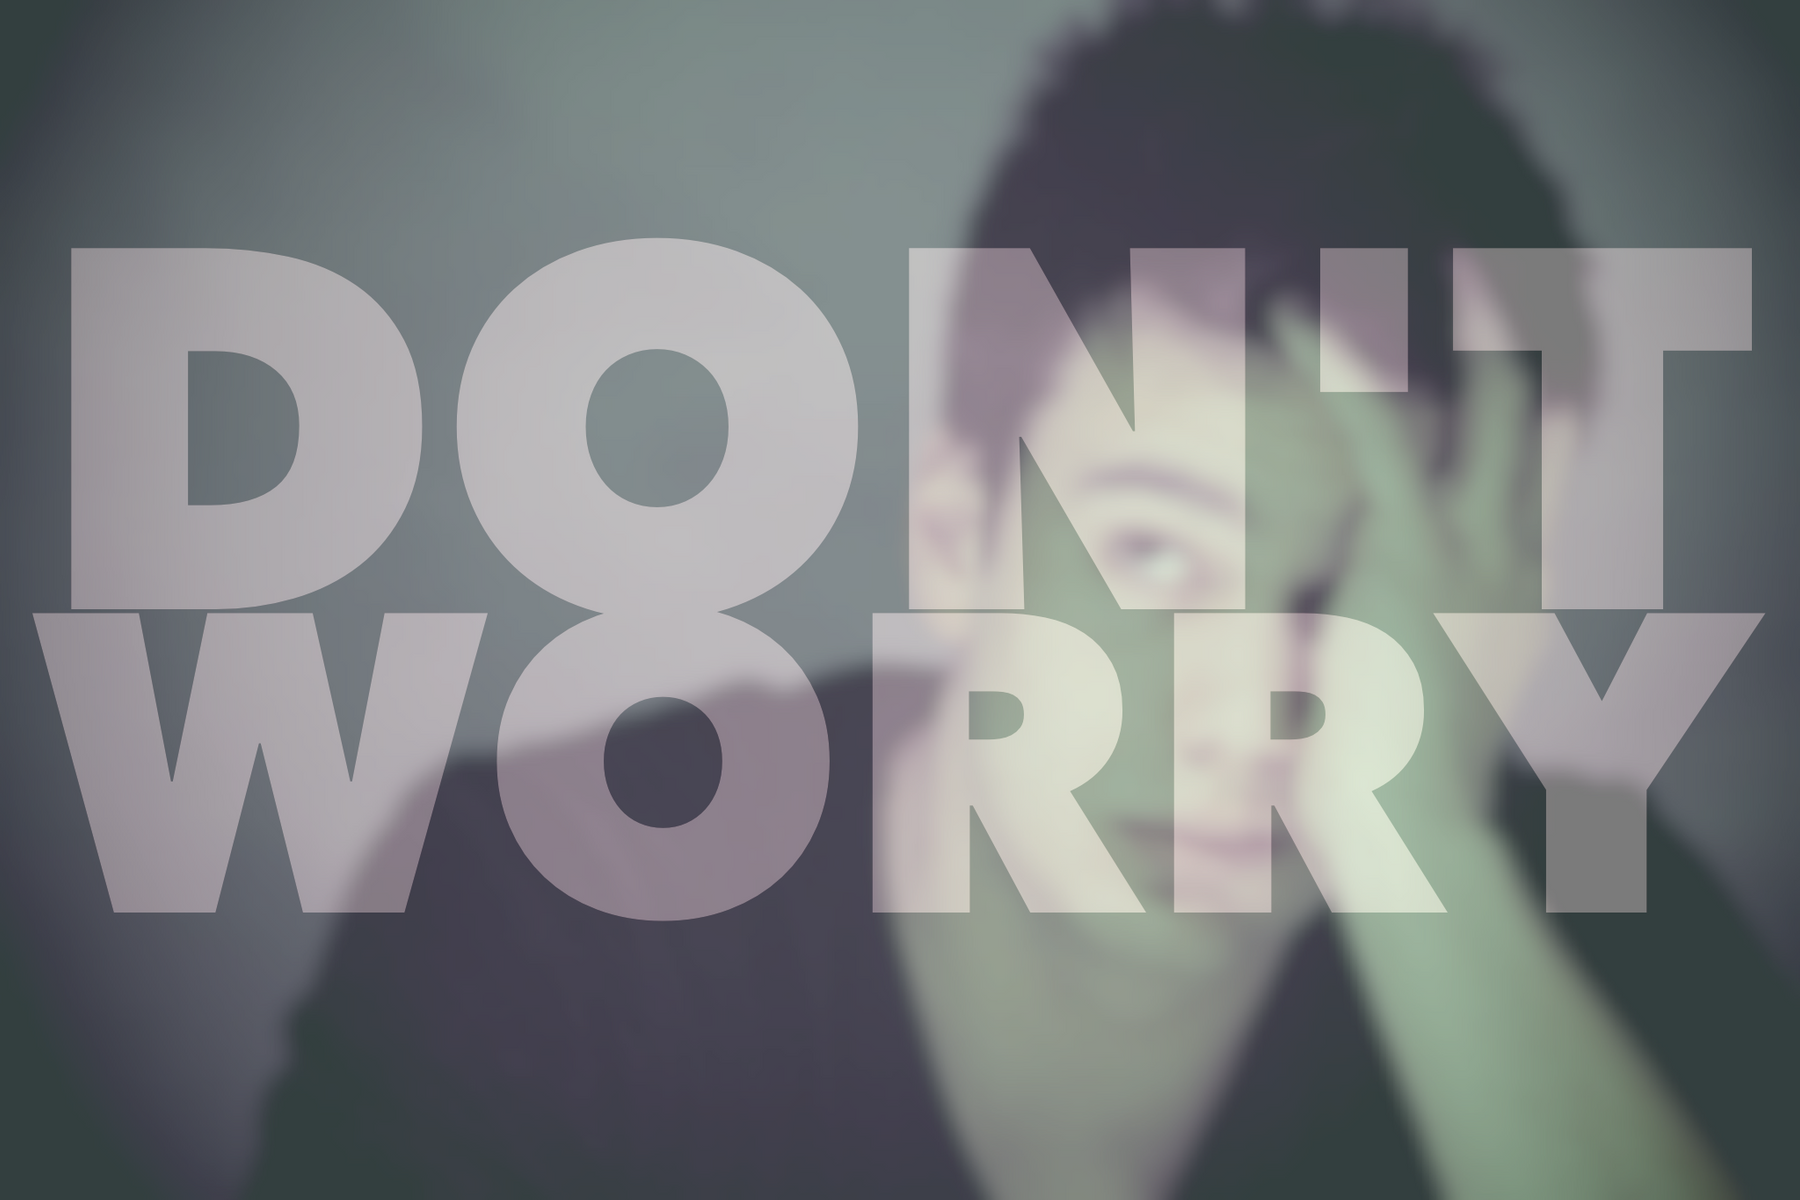 Dealing With Worries In Your Youth Ministry